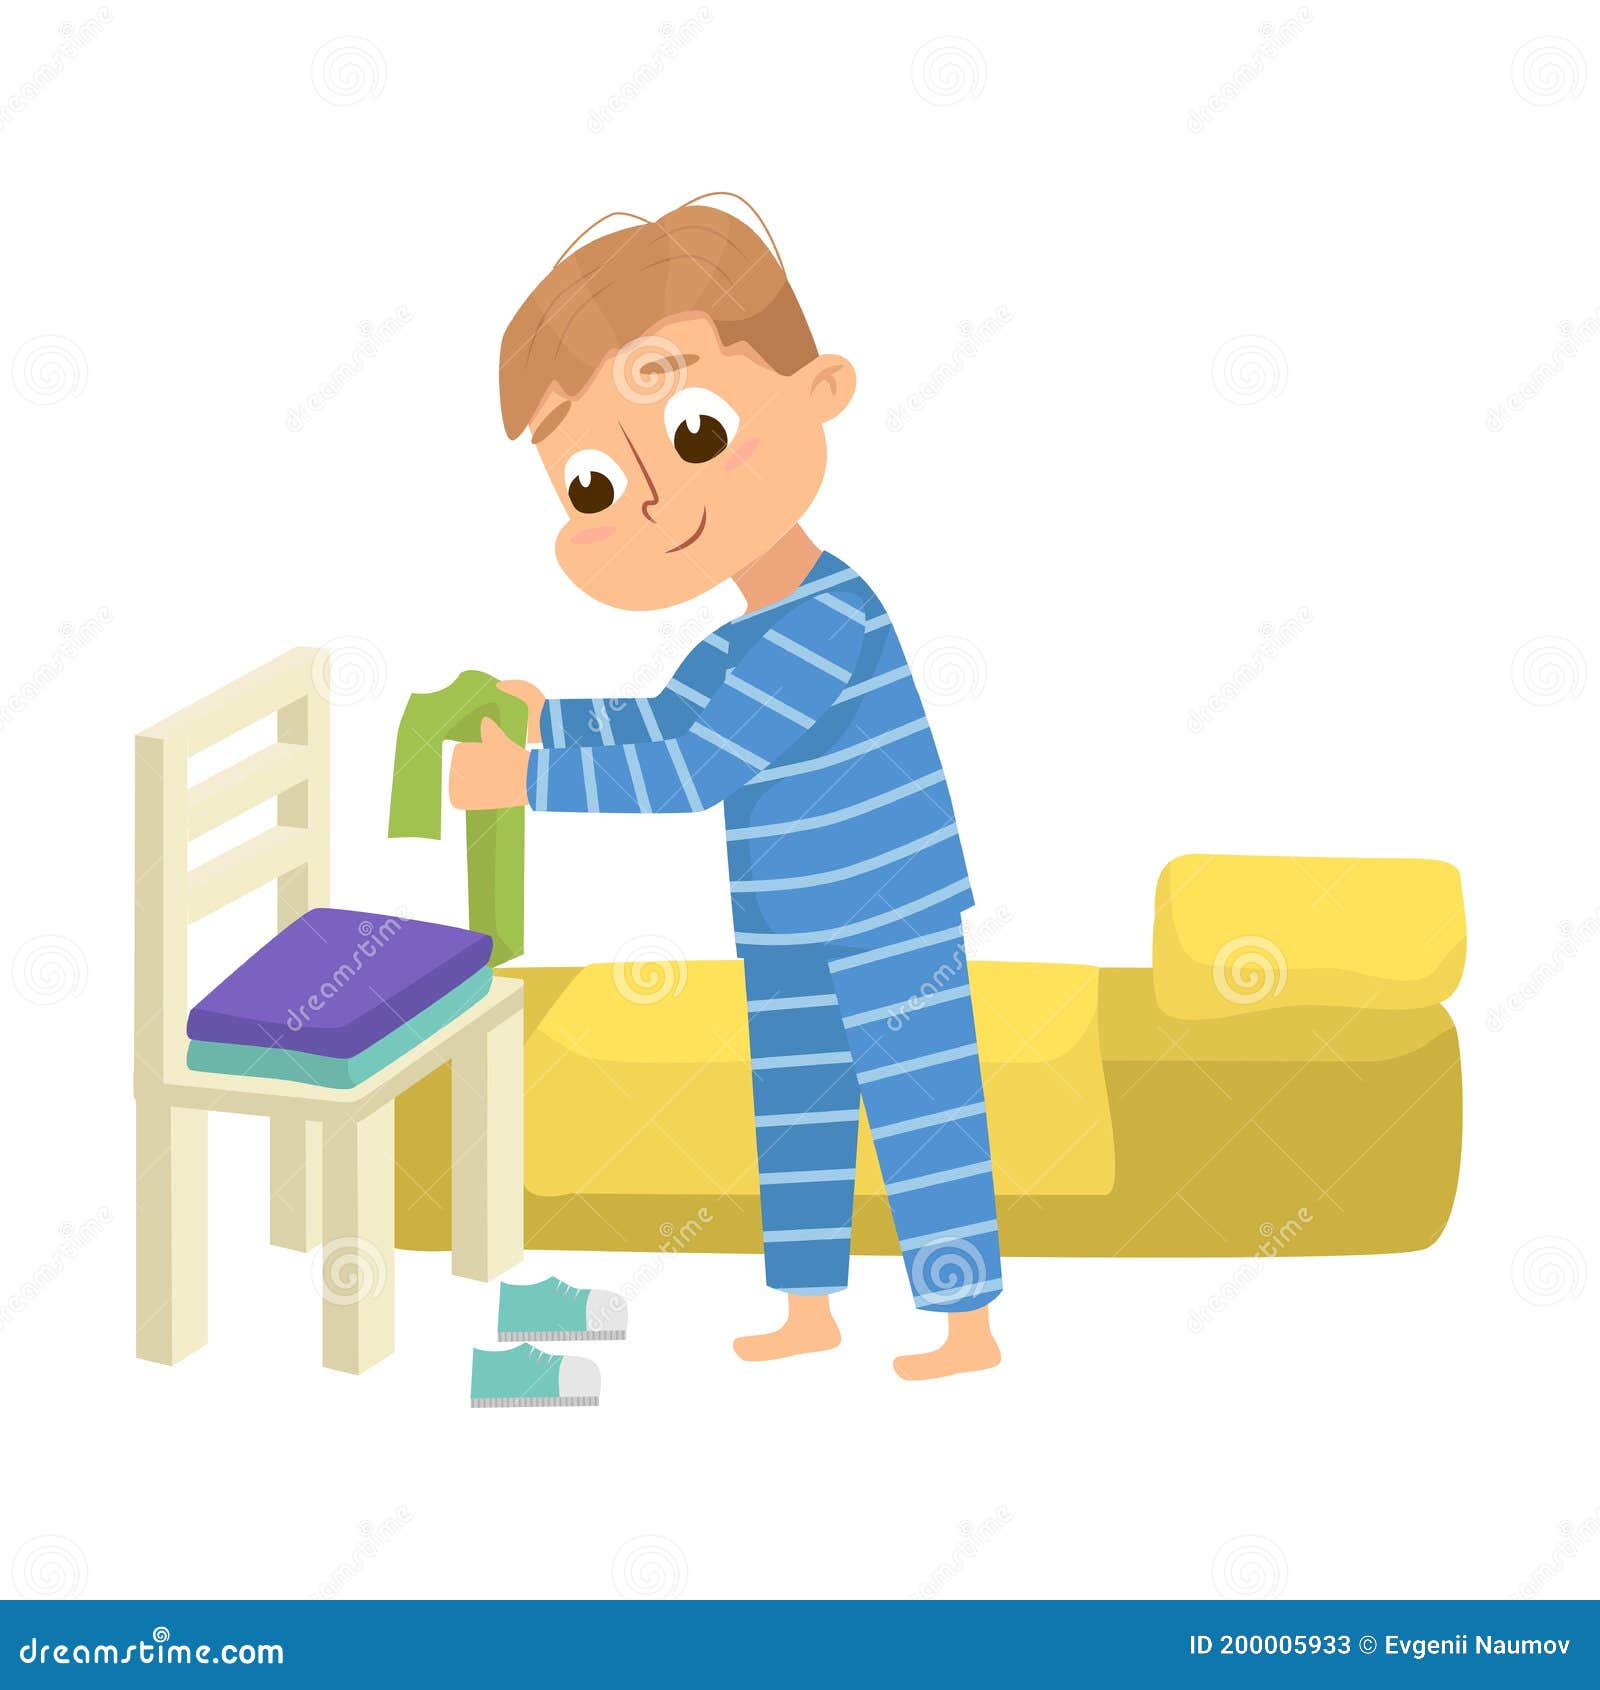 36 Getting Ready Bed Stock Illustrations Vectors Clipart